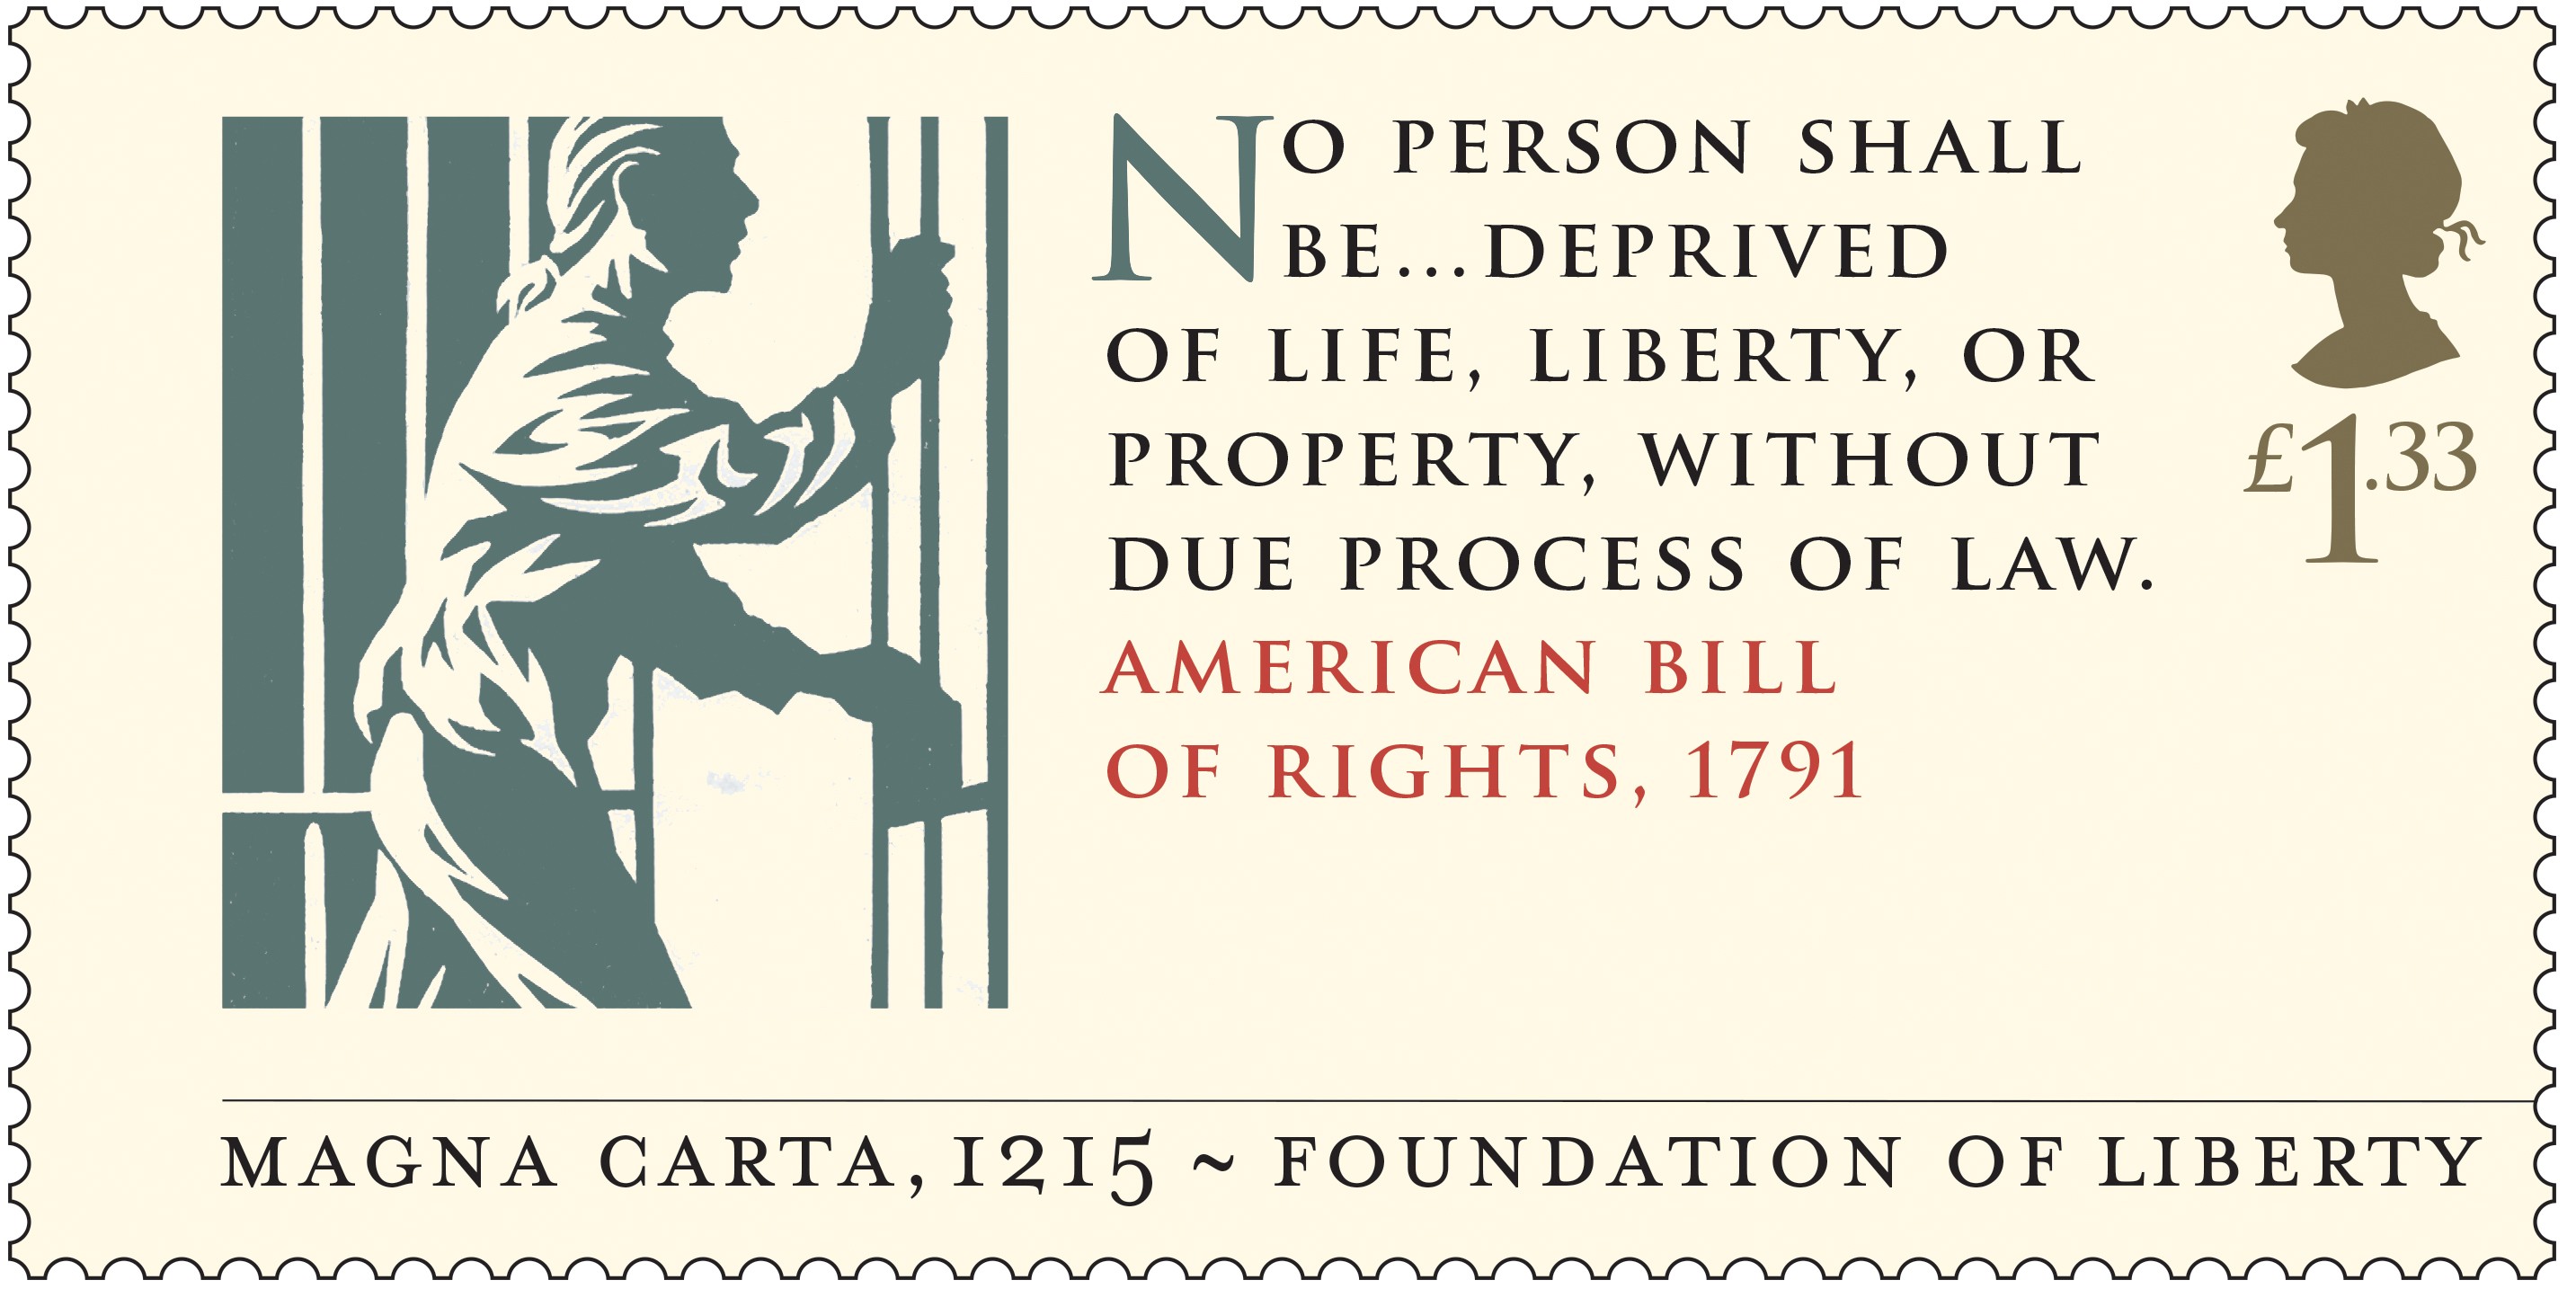 magna-carta-stamps-magna-carta-trust-800th-anniversary-celebrating-800-years-of-democracy